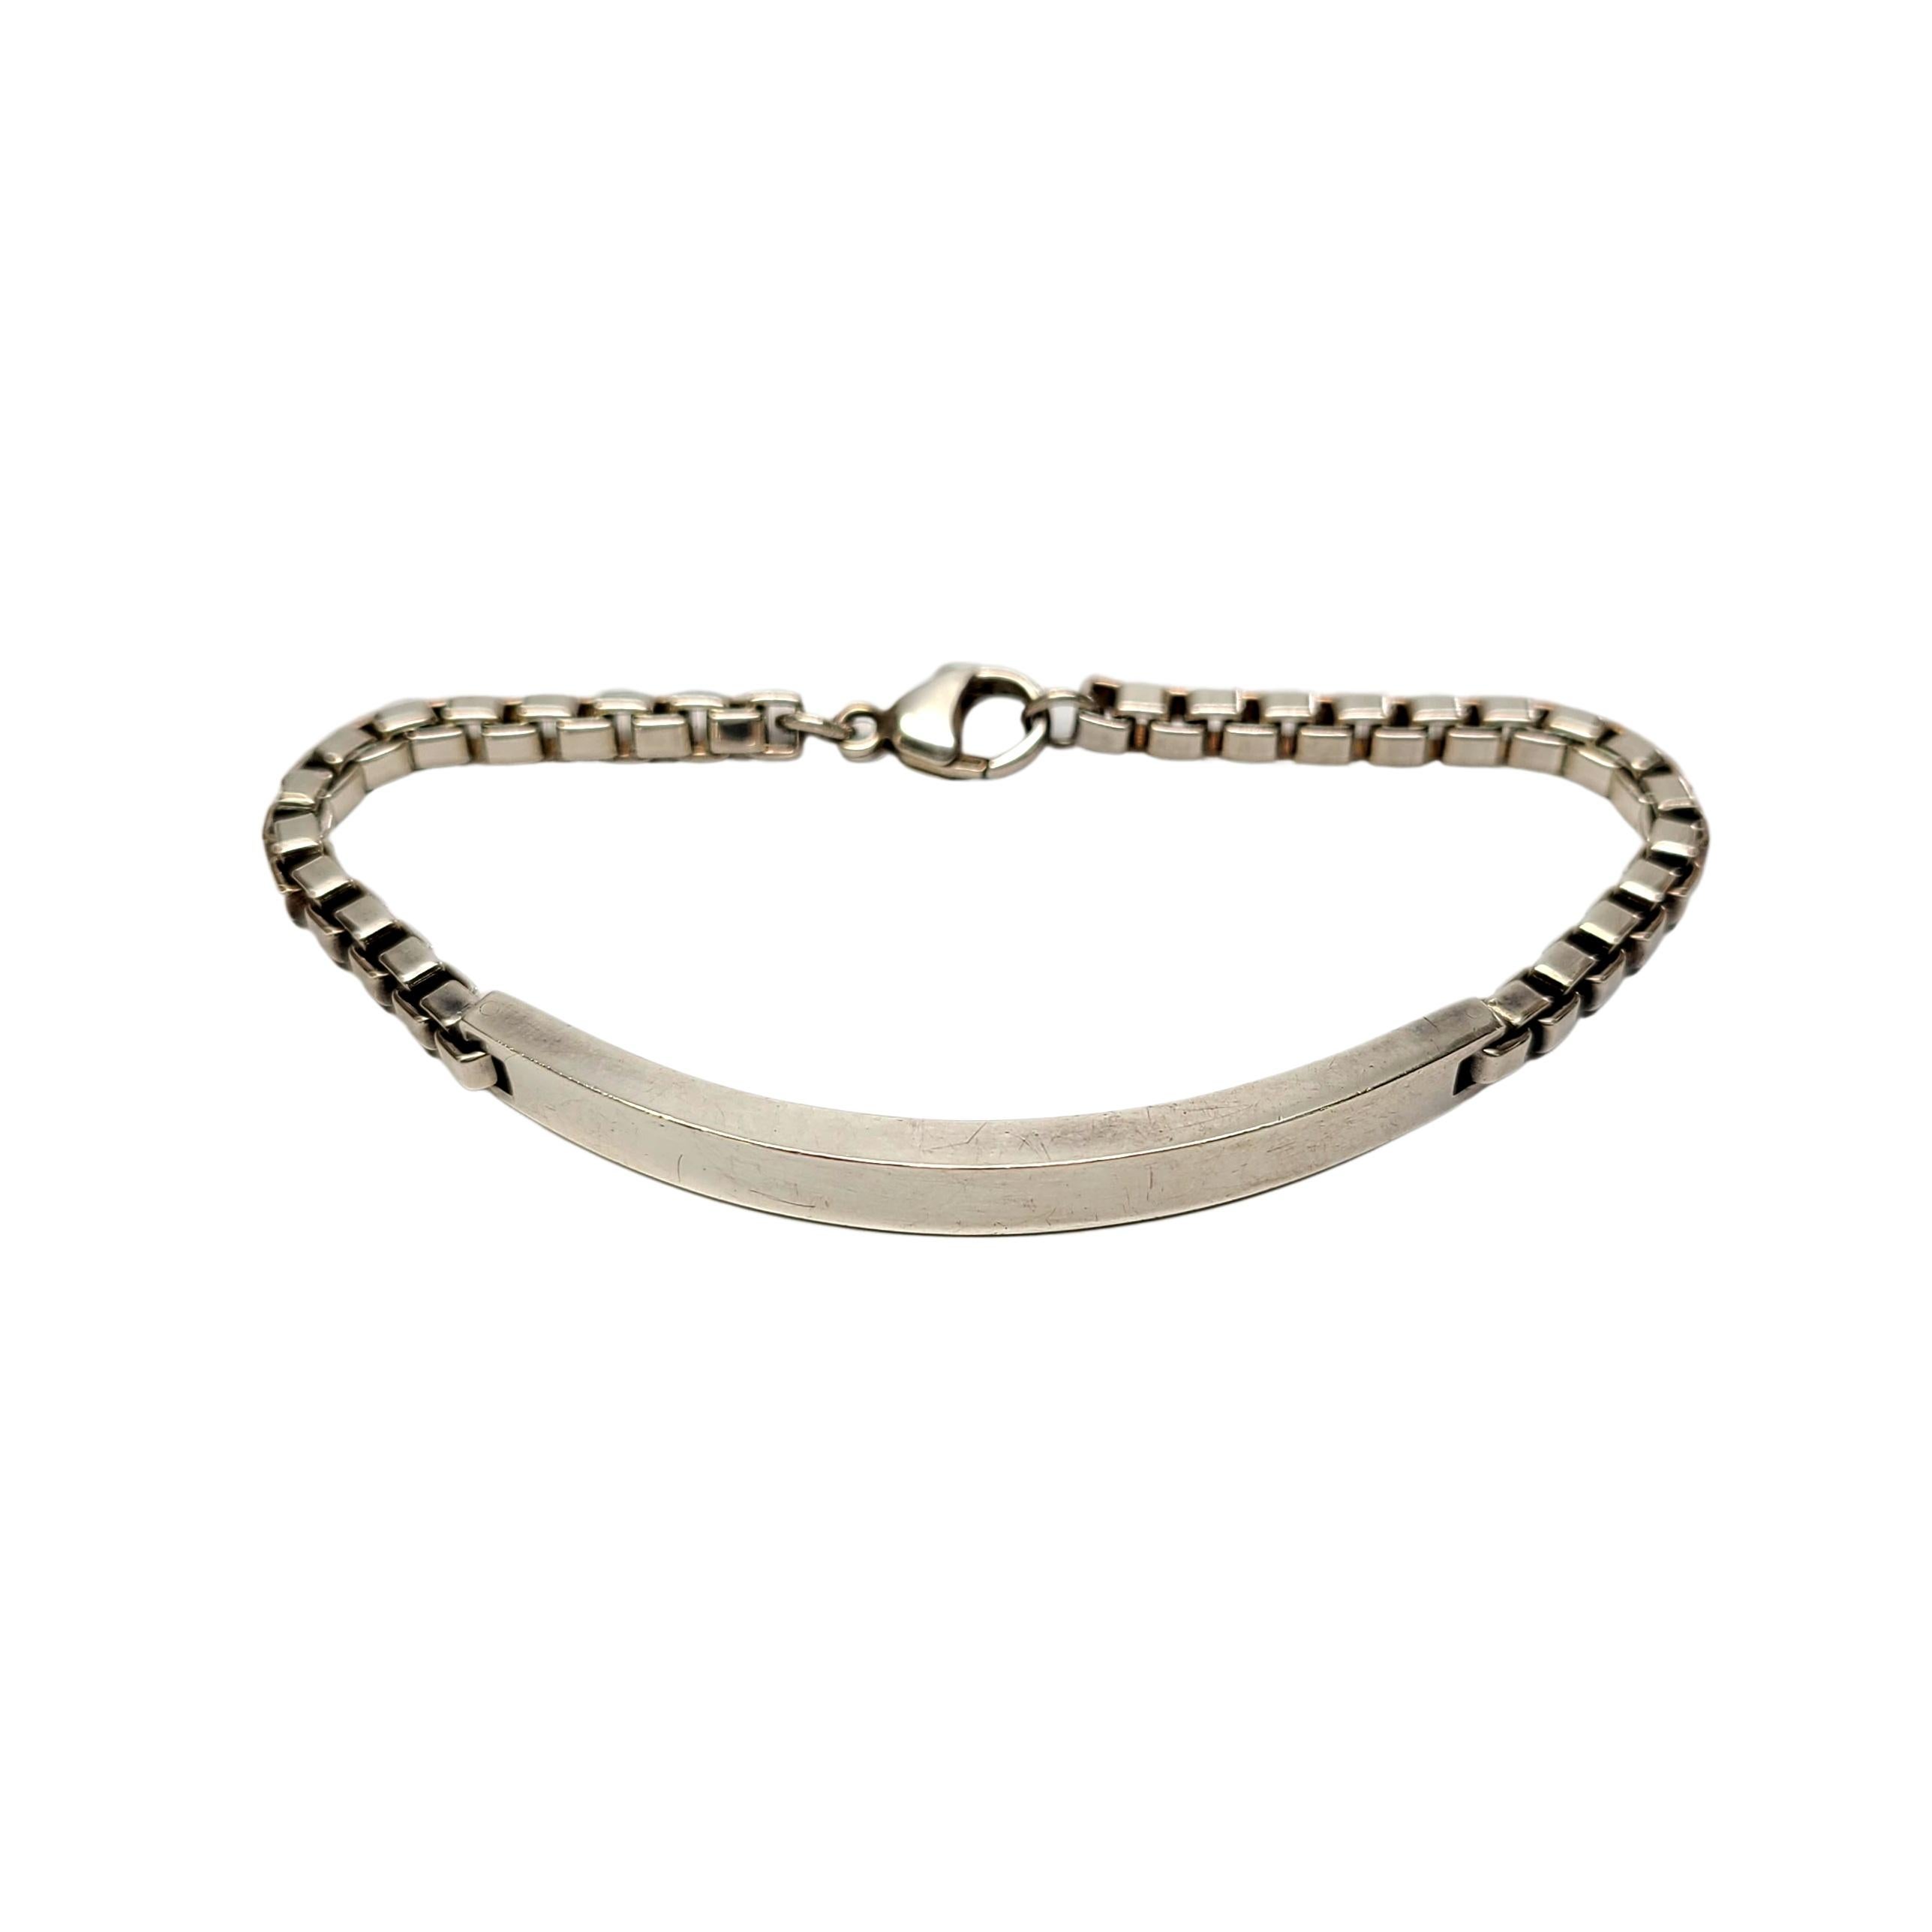 Tiffany & Co sterling silver Venetian link blank ID bracelet.

Authentic Tiffany sterling silver bracelet, features a curved, blank bar on a Venetian box link chain. Tiffany pouch and box not included.

Measures approx 7